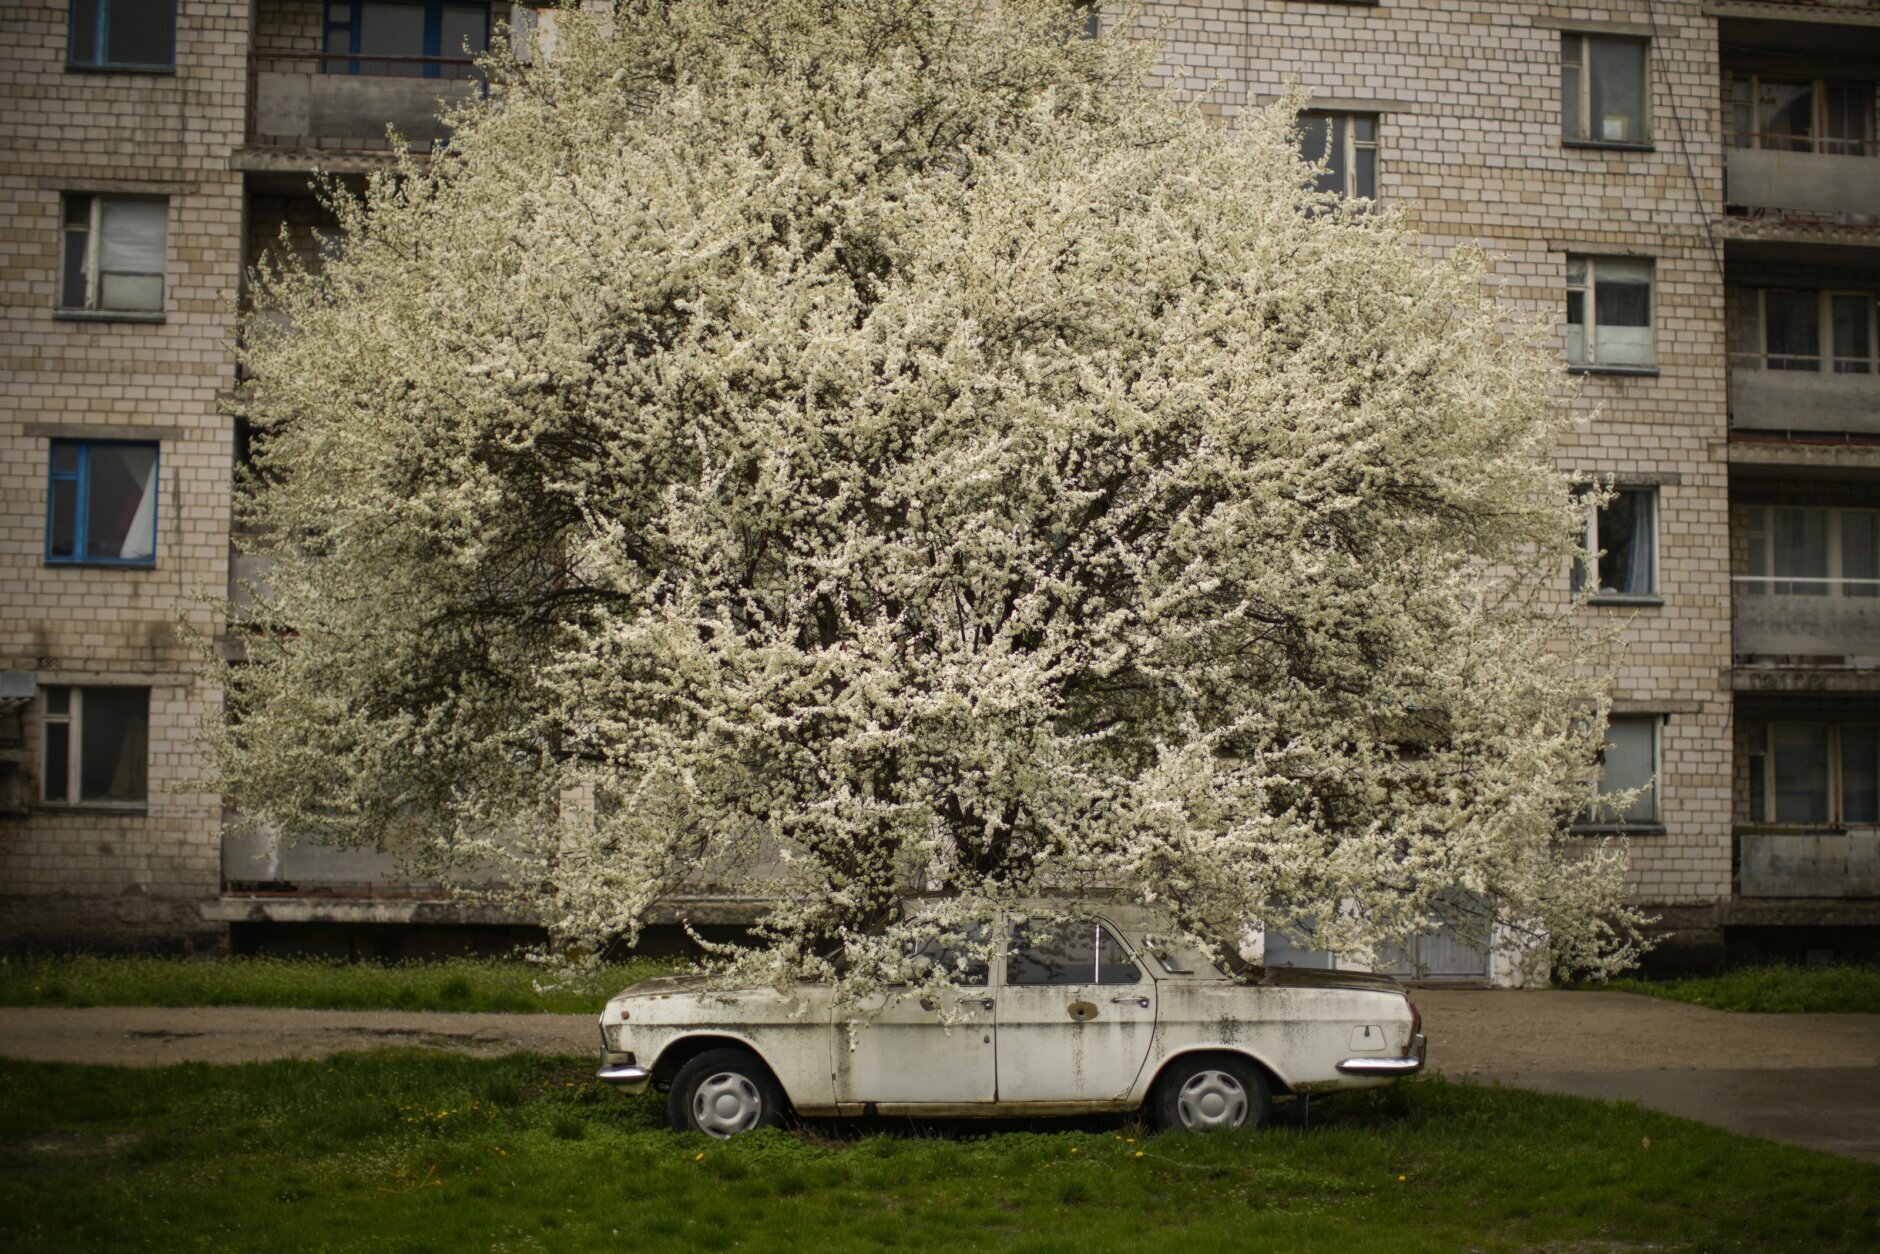 A car is parked under a tree in partially abandoned Chernobyl town, Ukraine, Tuesday, April 26, 2022. (AP Photo/Francisco Seco)